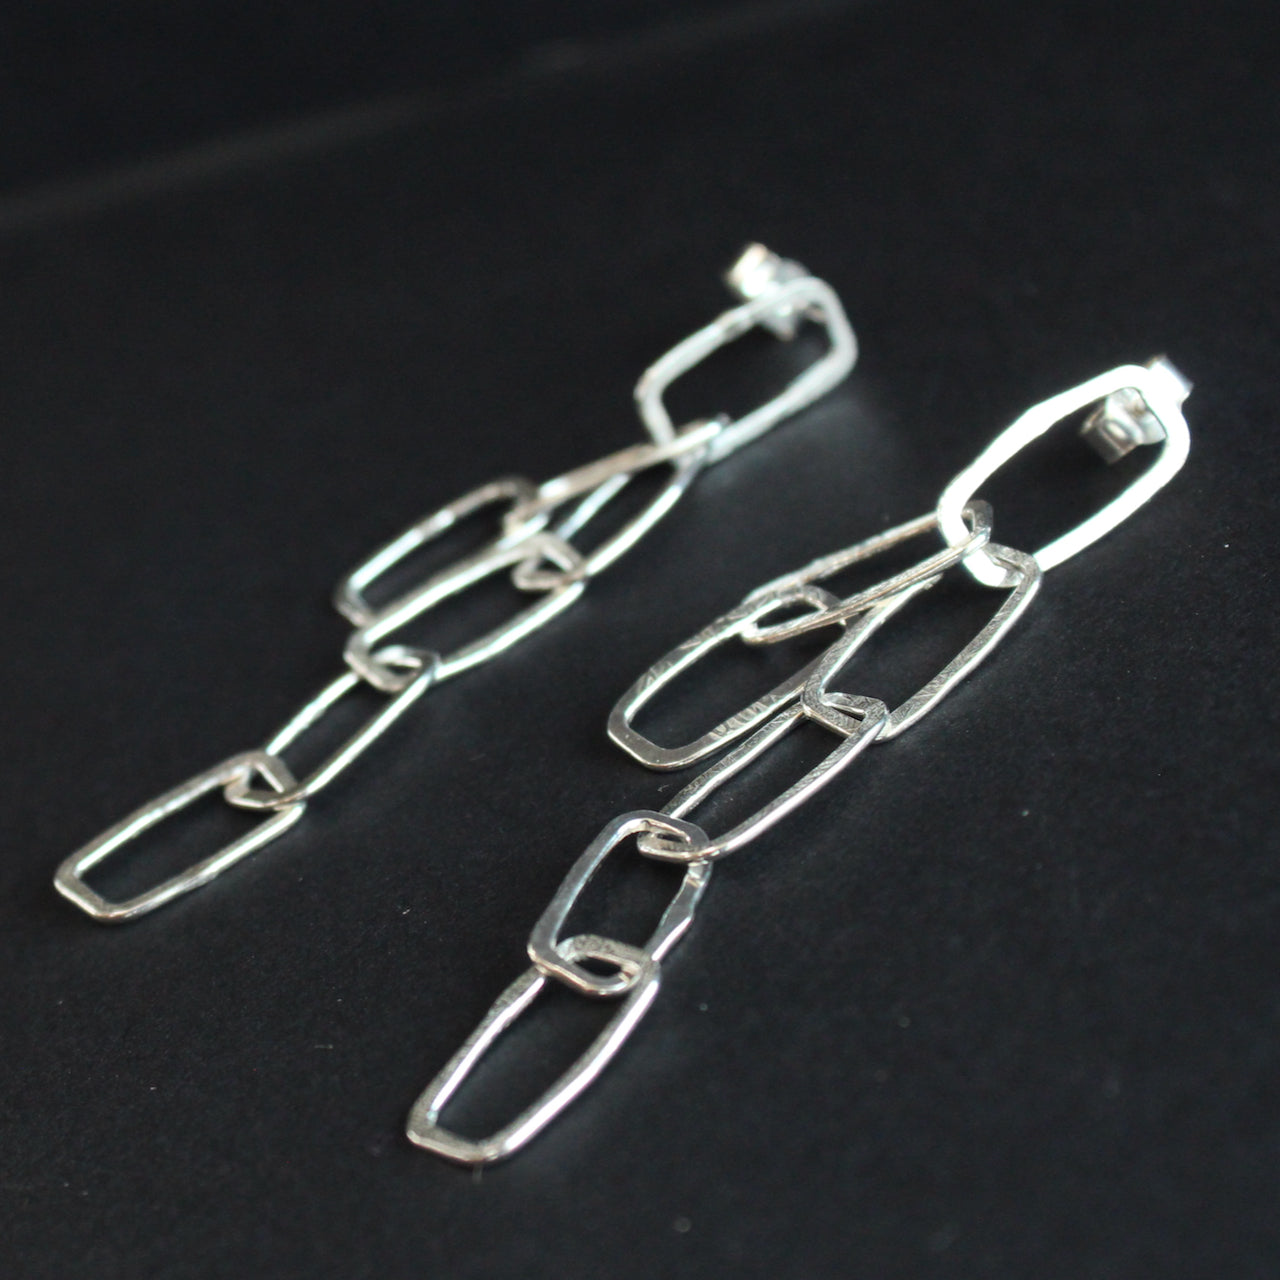 Silver mini monolith shape chain earrings by Cornish artist Lucy Spink